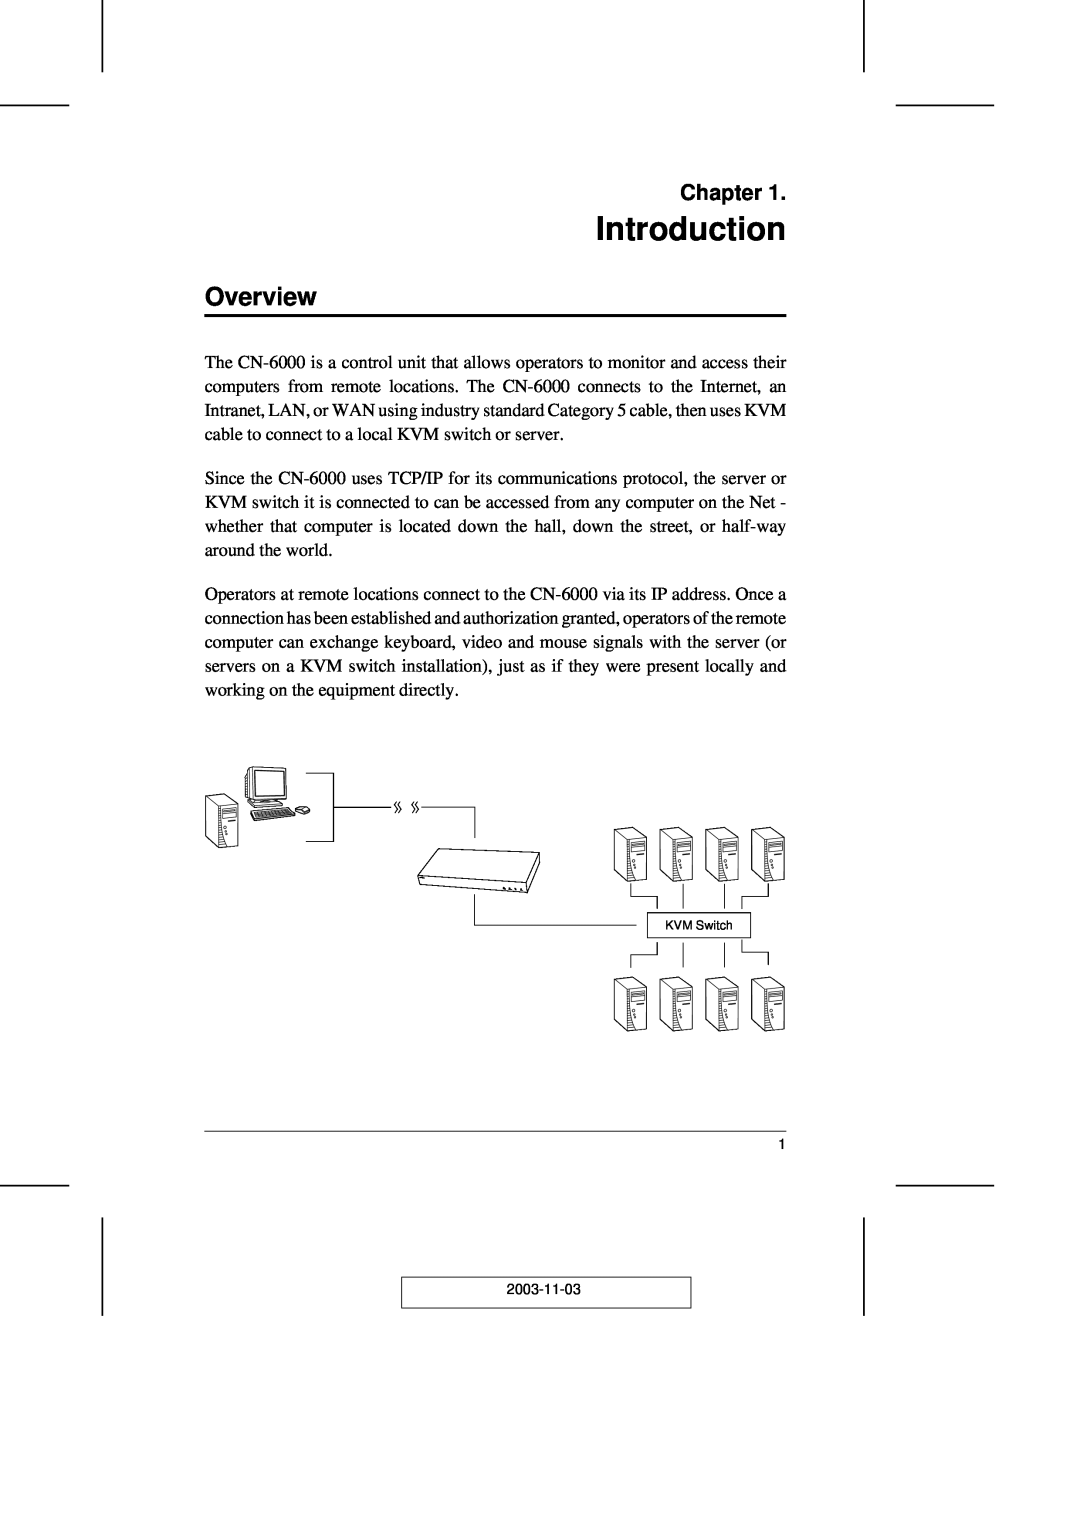 ATEN Technology CN-6000 user manual Introduction, Overview, Chapter 